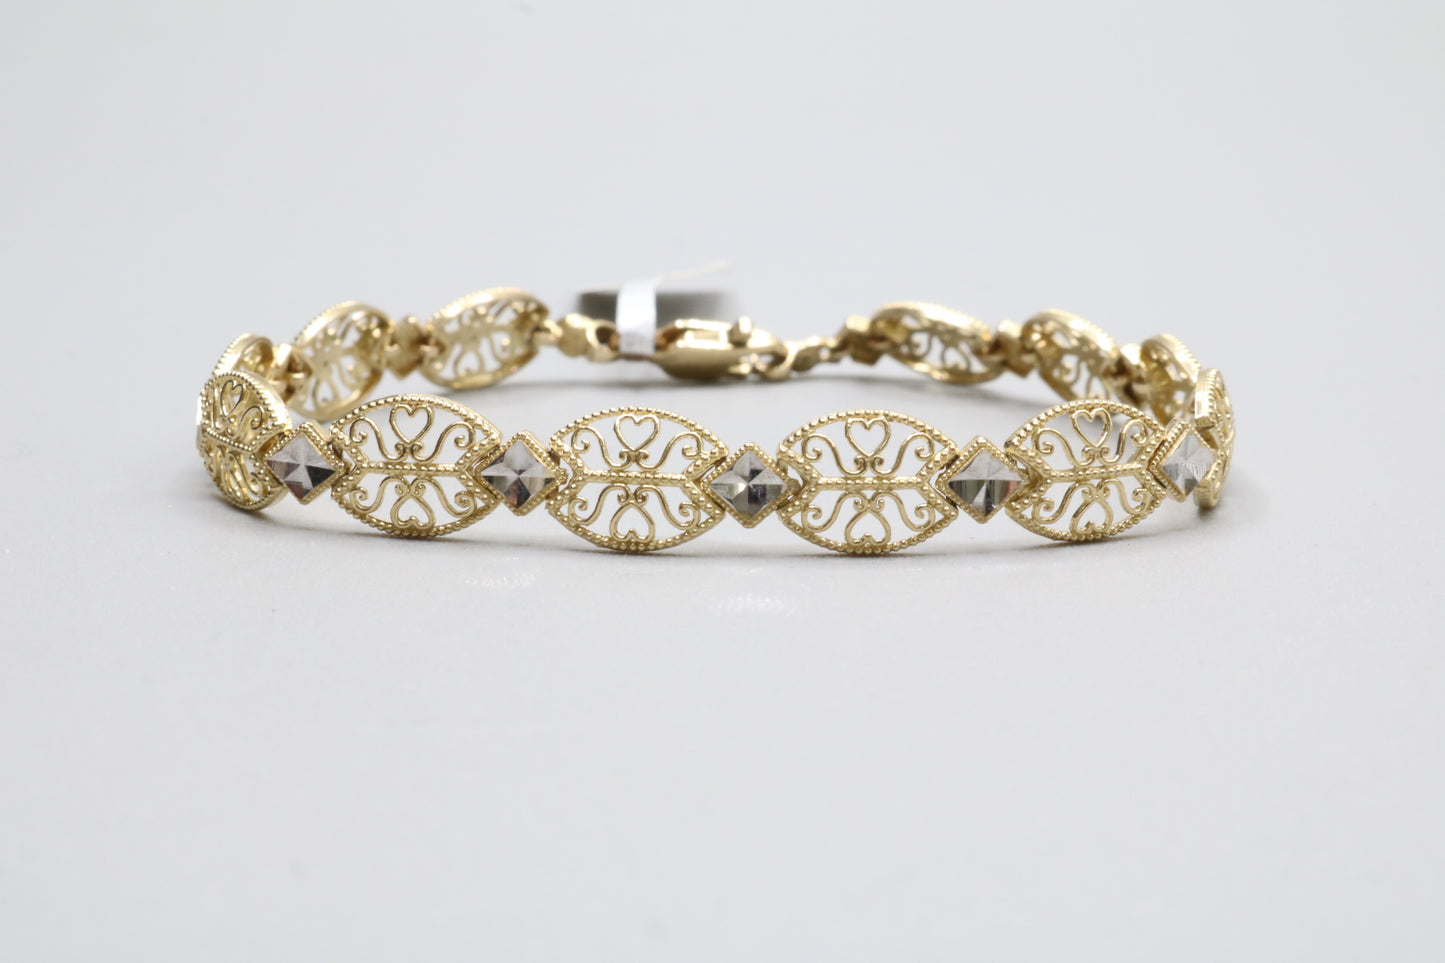 14K Two Tone Gold Ornate Bracelet (6 3/4 Inches)